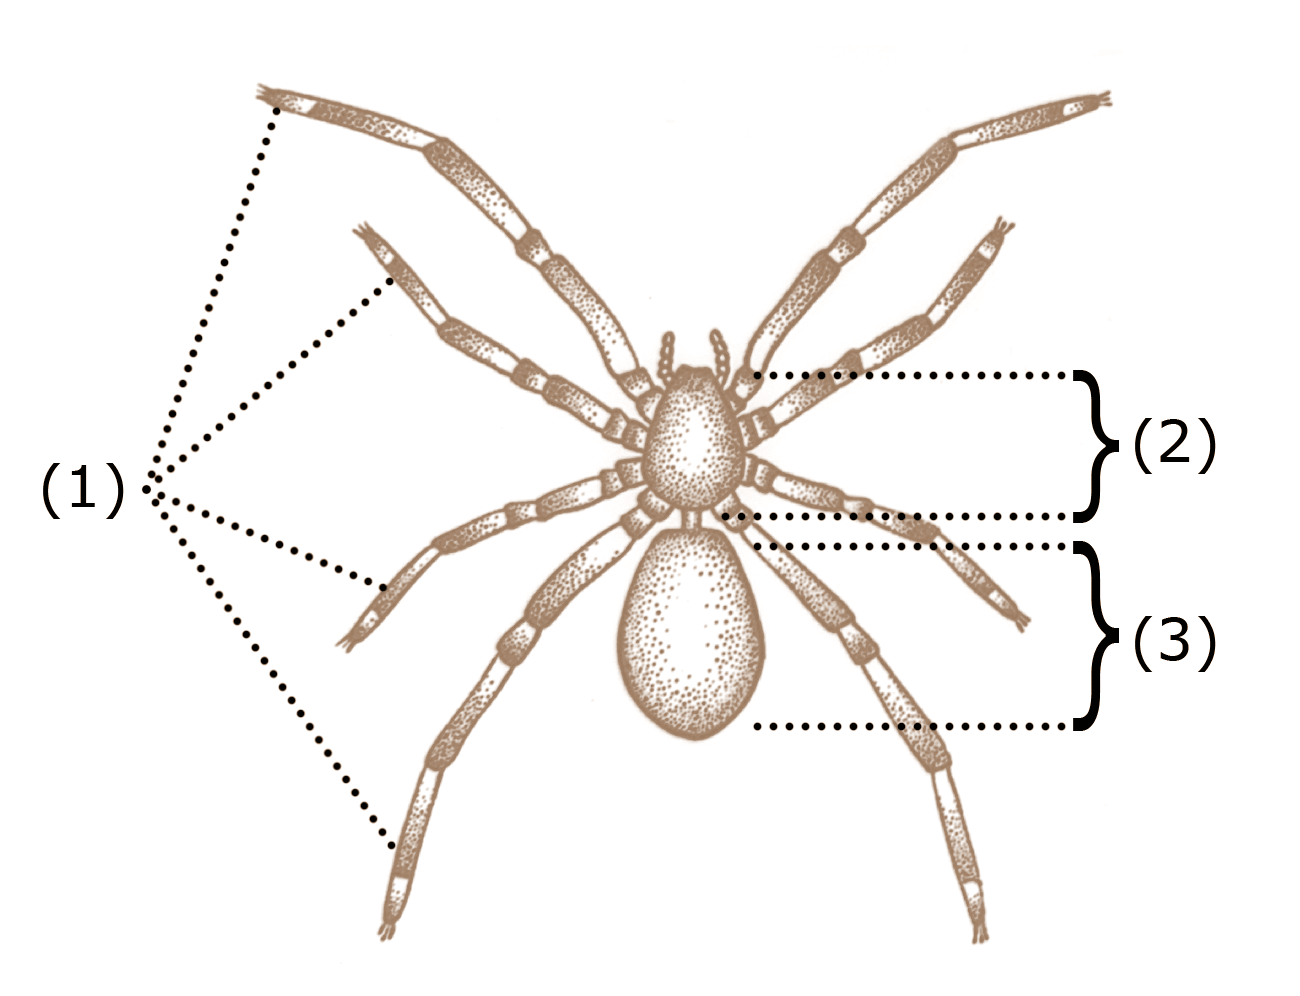 What is the function of the legs in a spider?